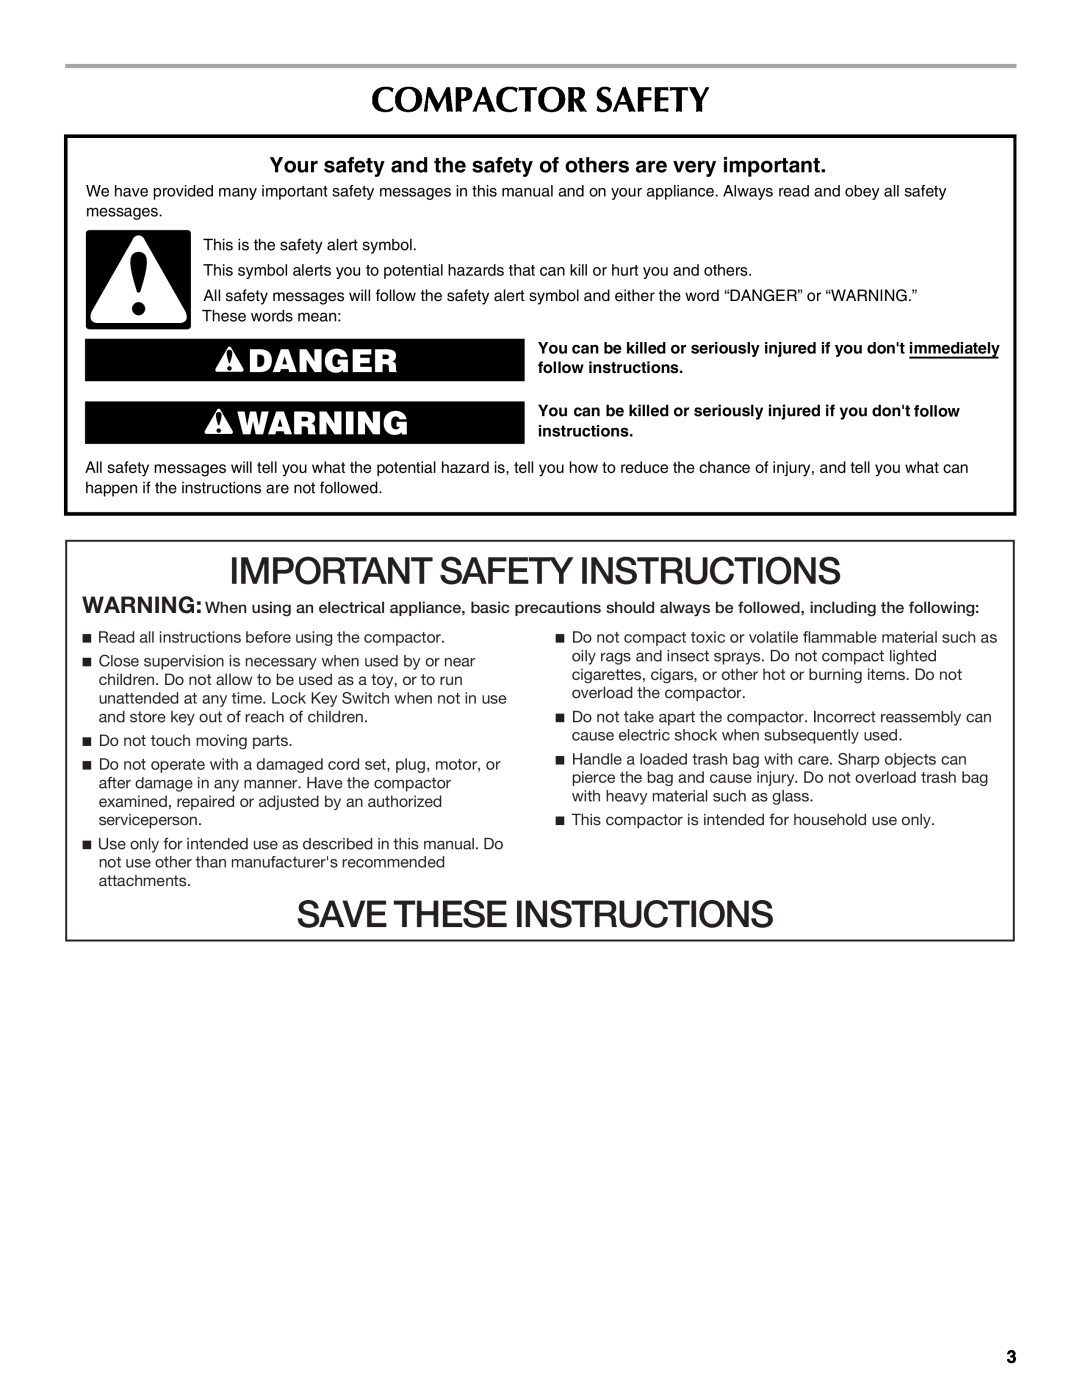 Maytag MTUC7000AWS, W10190314A manual Compactor Safety, Important Safety Instructions, Save These Instructions, Danger 